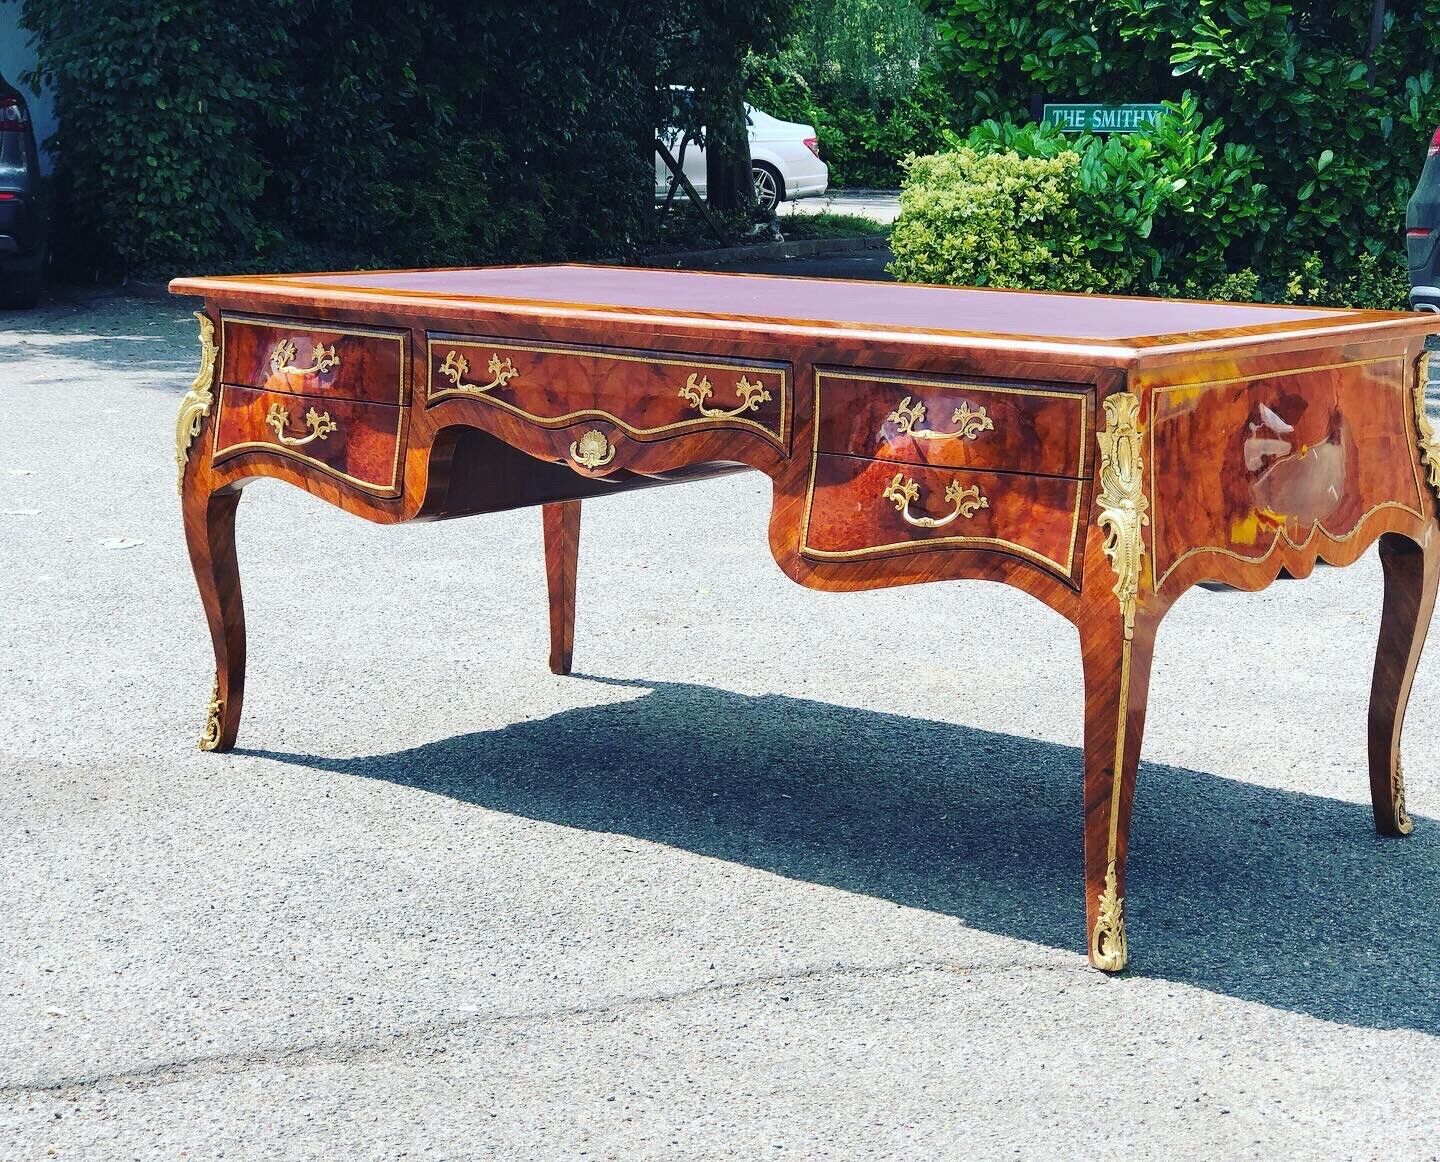 Large Empire Style Inlaid Kingswood Desk With Brass Decoration